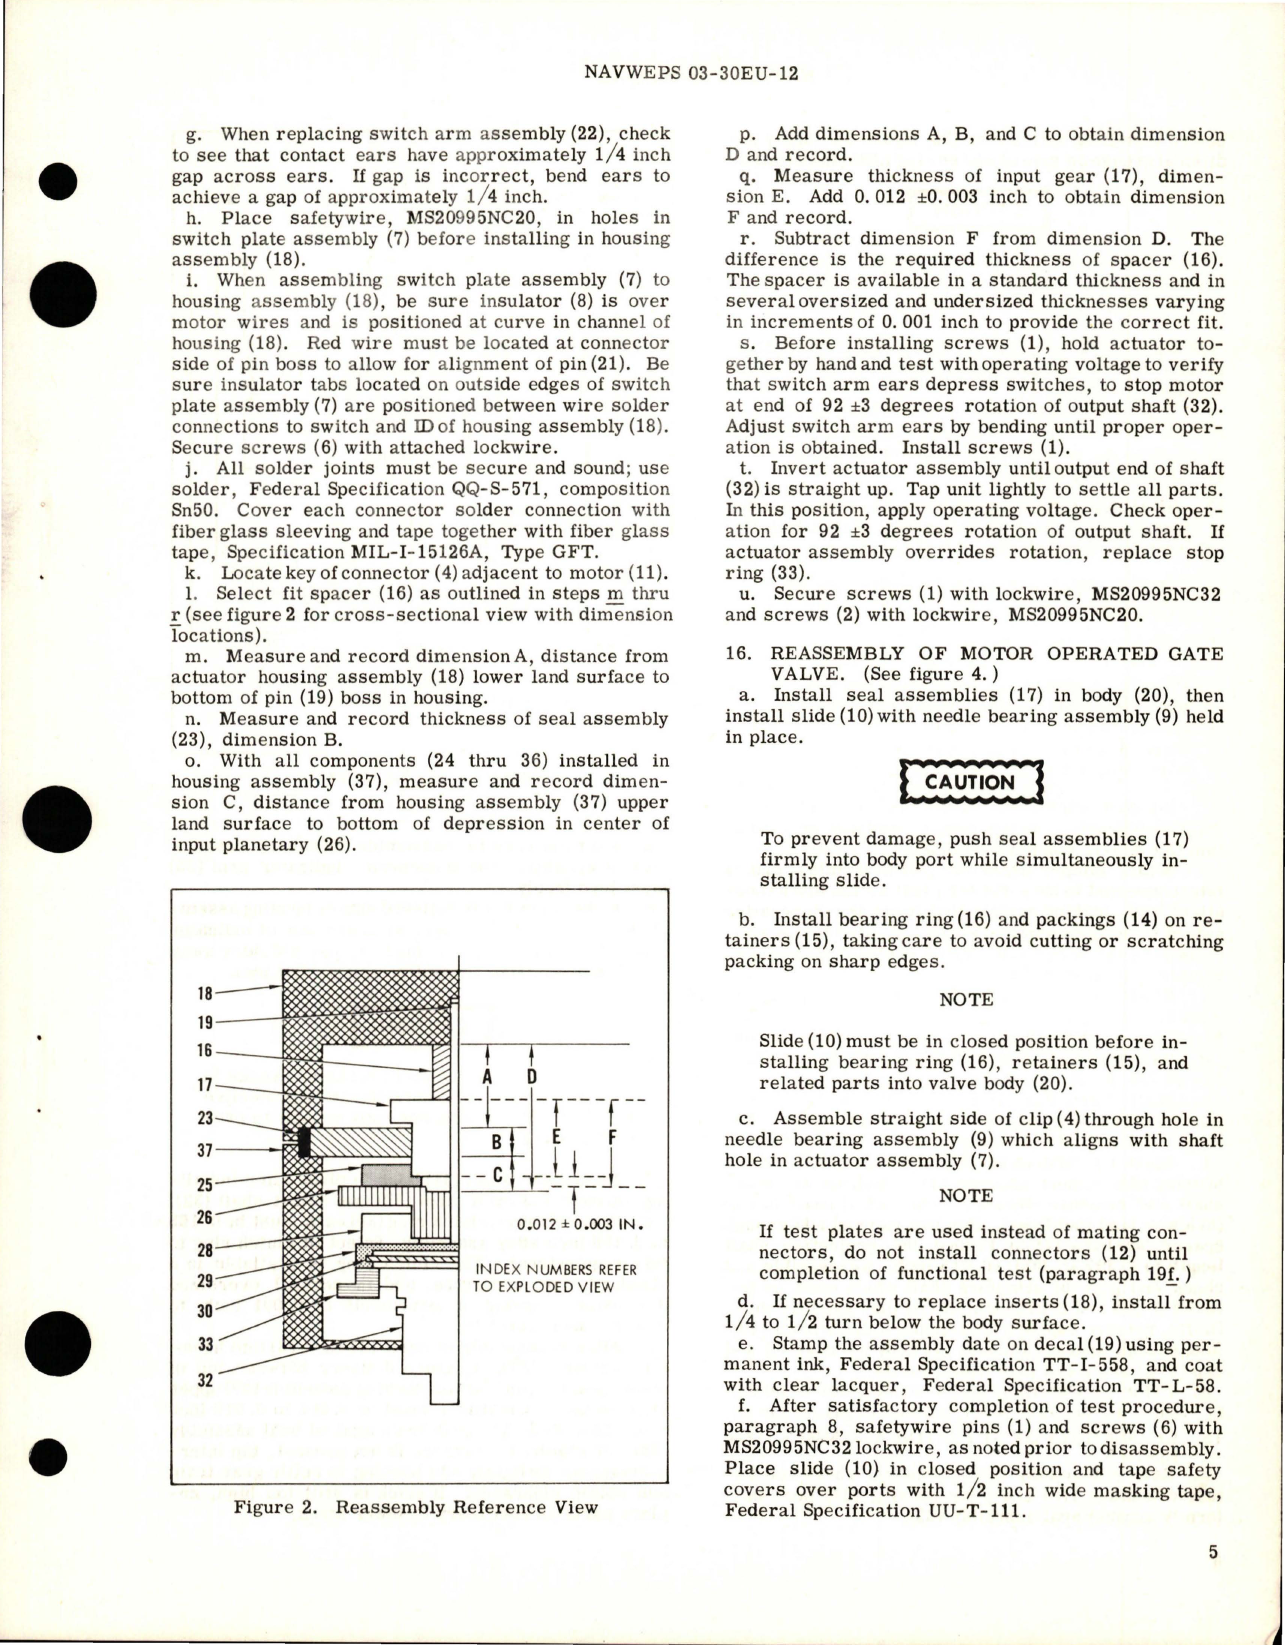 Sample page 7 from AirCorps Library document: Overhaul Instructions with Parts Breakdown for Motor Operated Gate Valve - Part AV16B1613